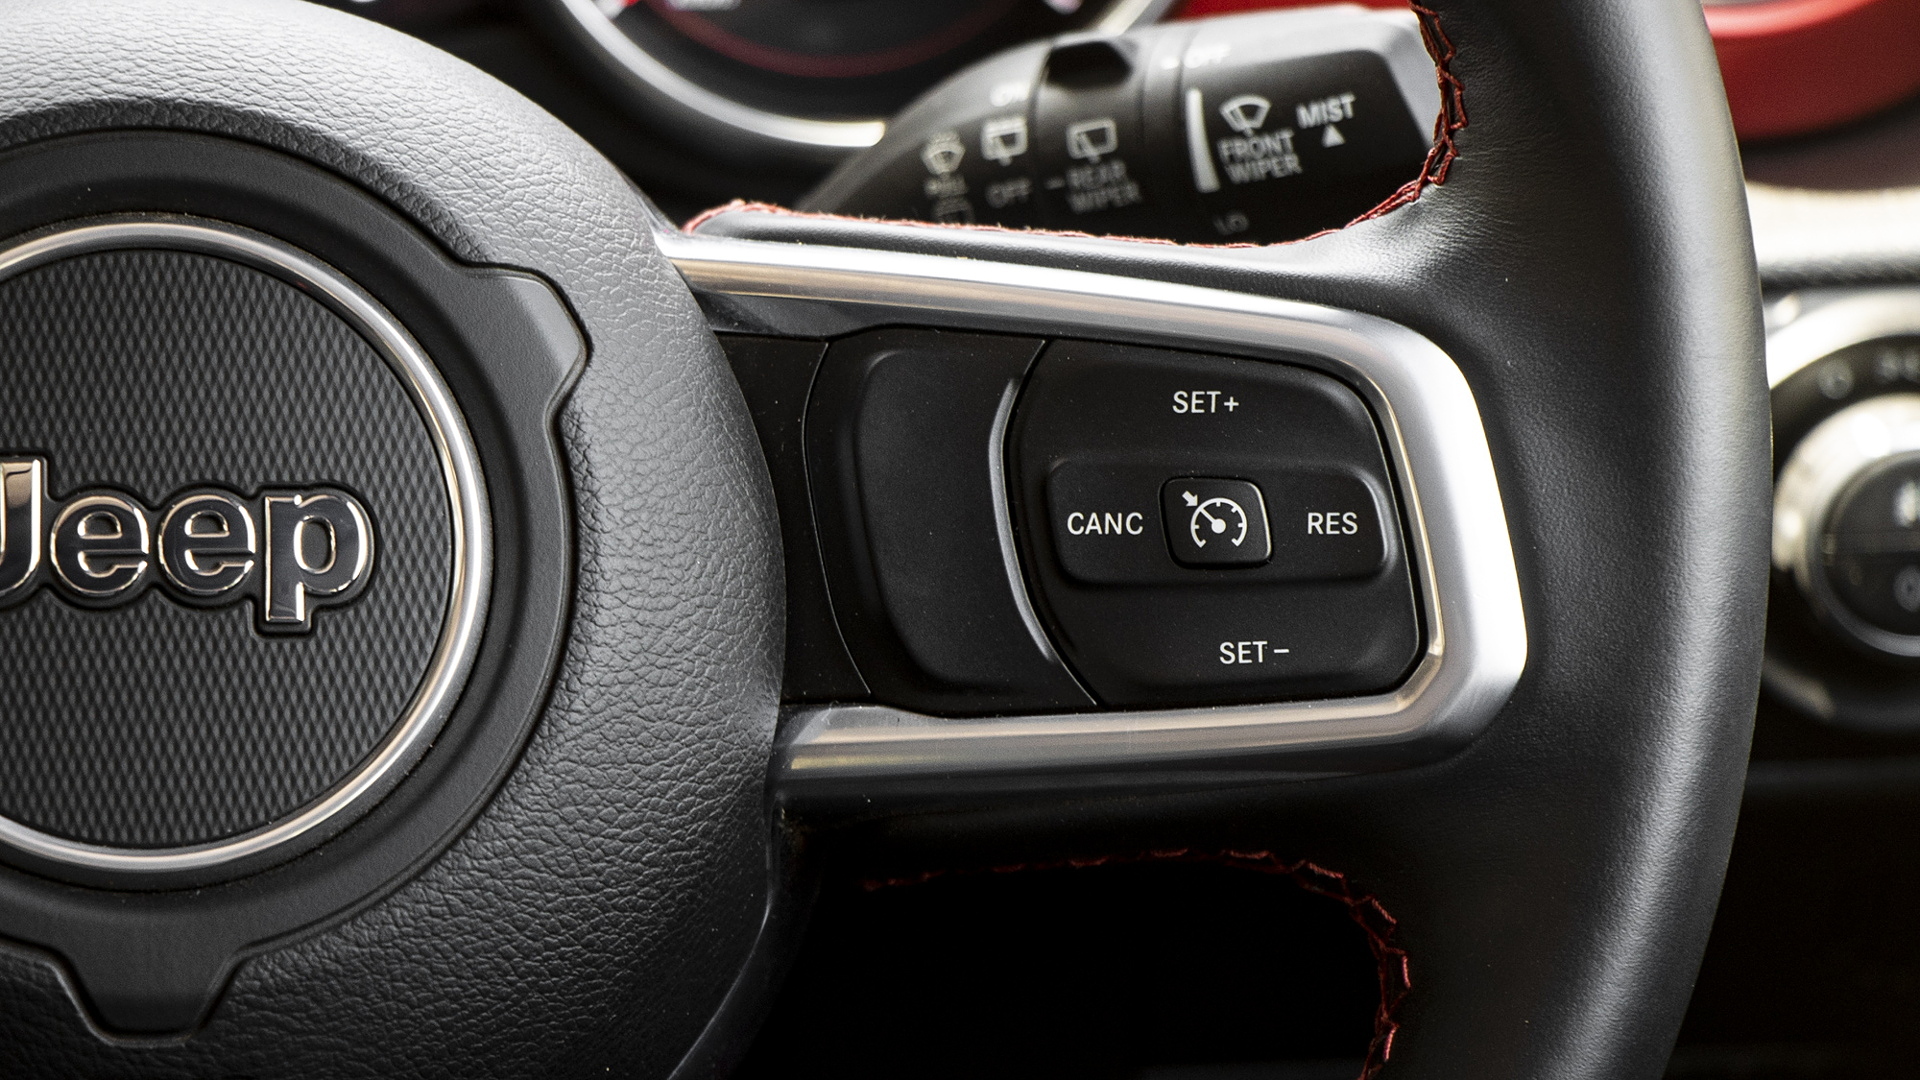 Wrangler Right Steering Mounted Controls Image, Wrangler Photos in India -  CarWale